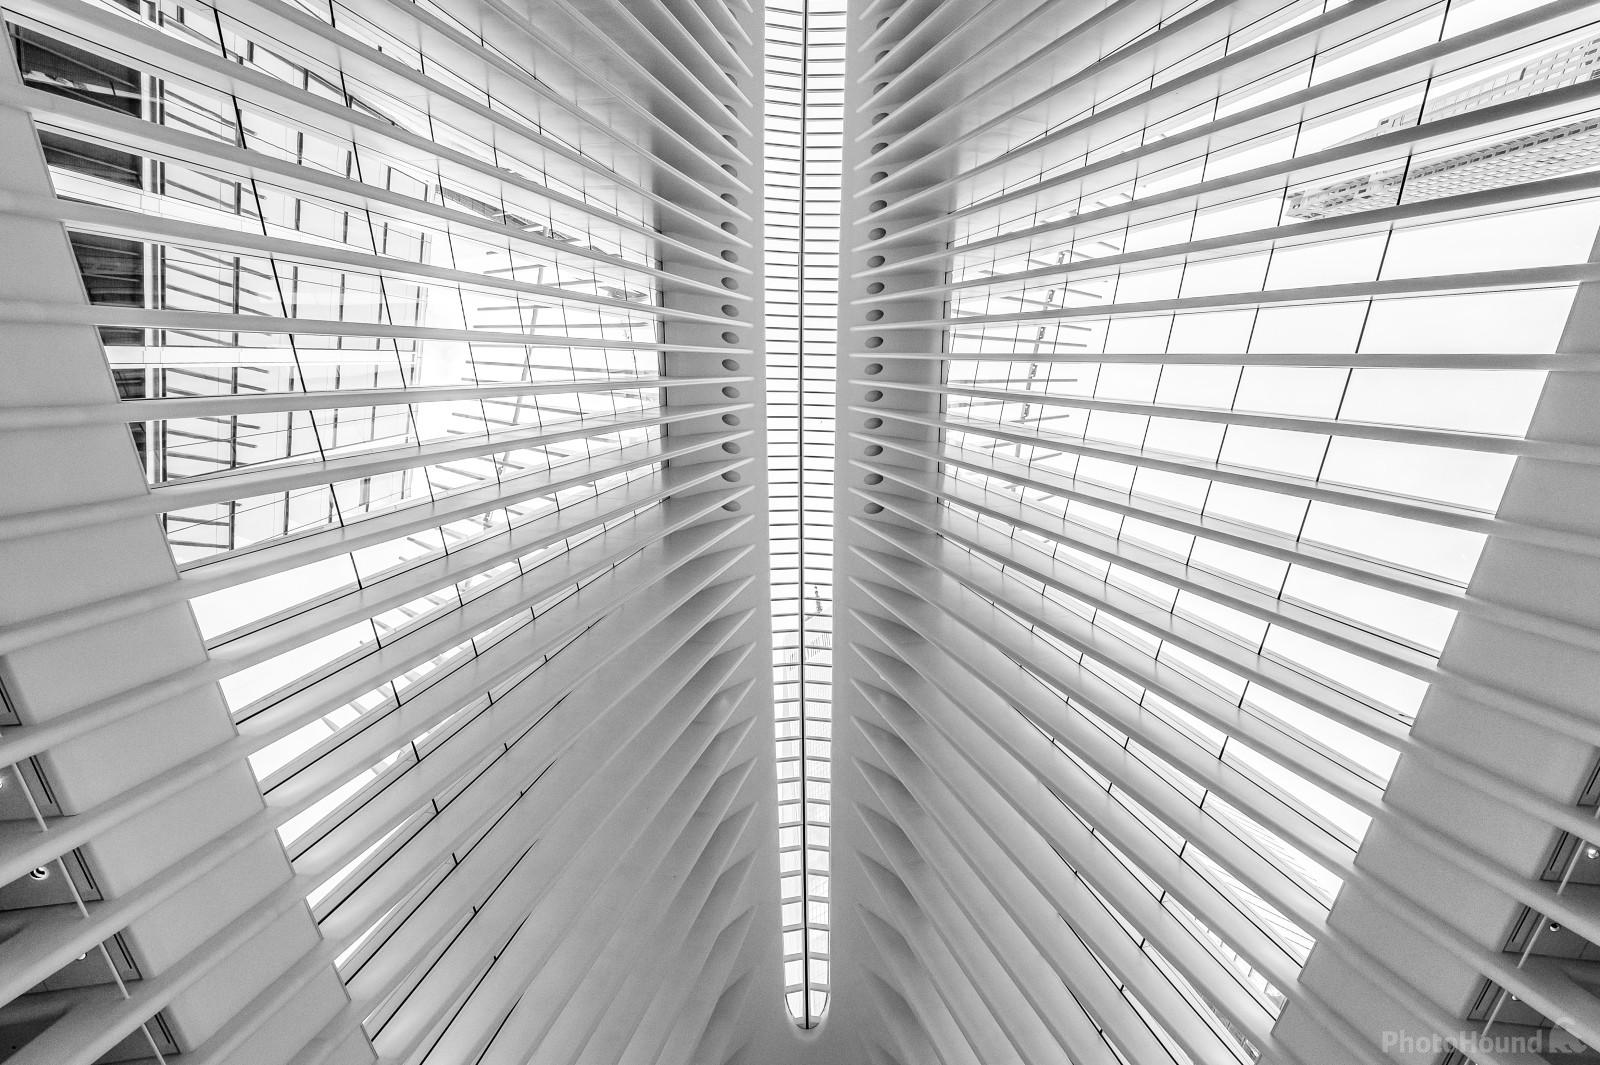 Image of The Oculus (Interior) by VOJTa Herout